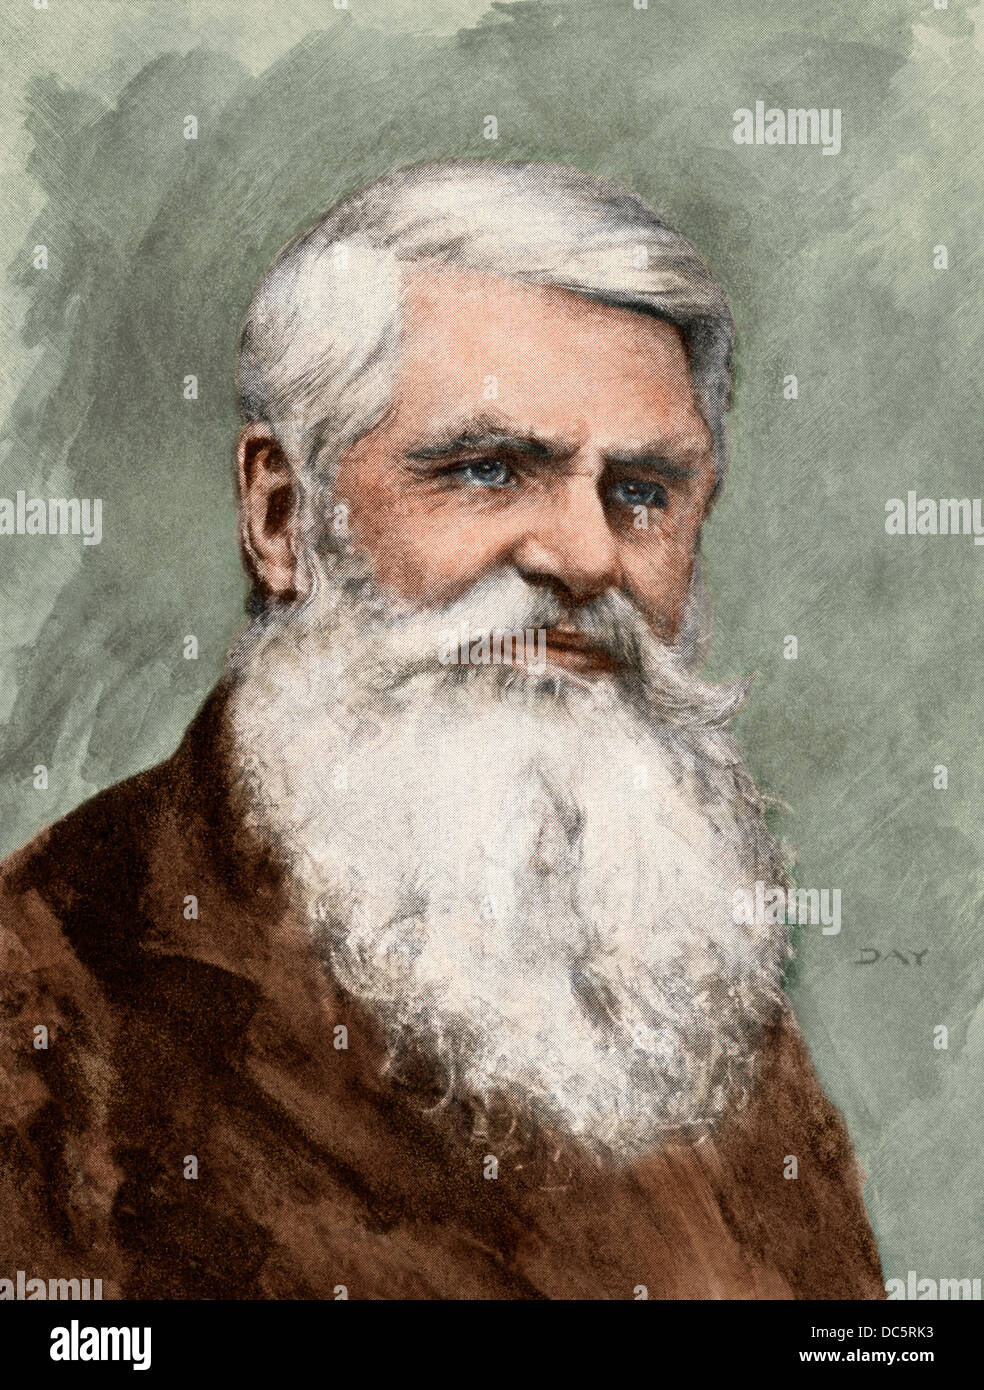 British naturalist Alfred Russell Wallace. Digitally colored halftone of an illustration Stock Photo